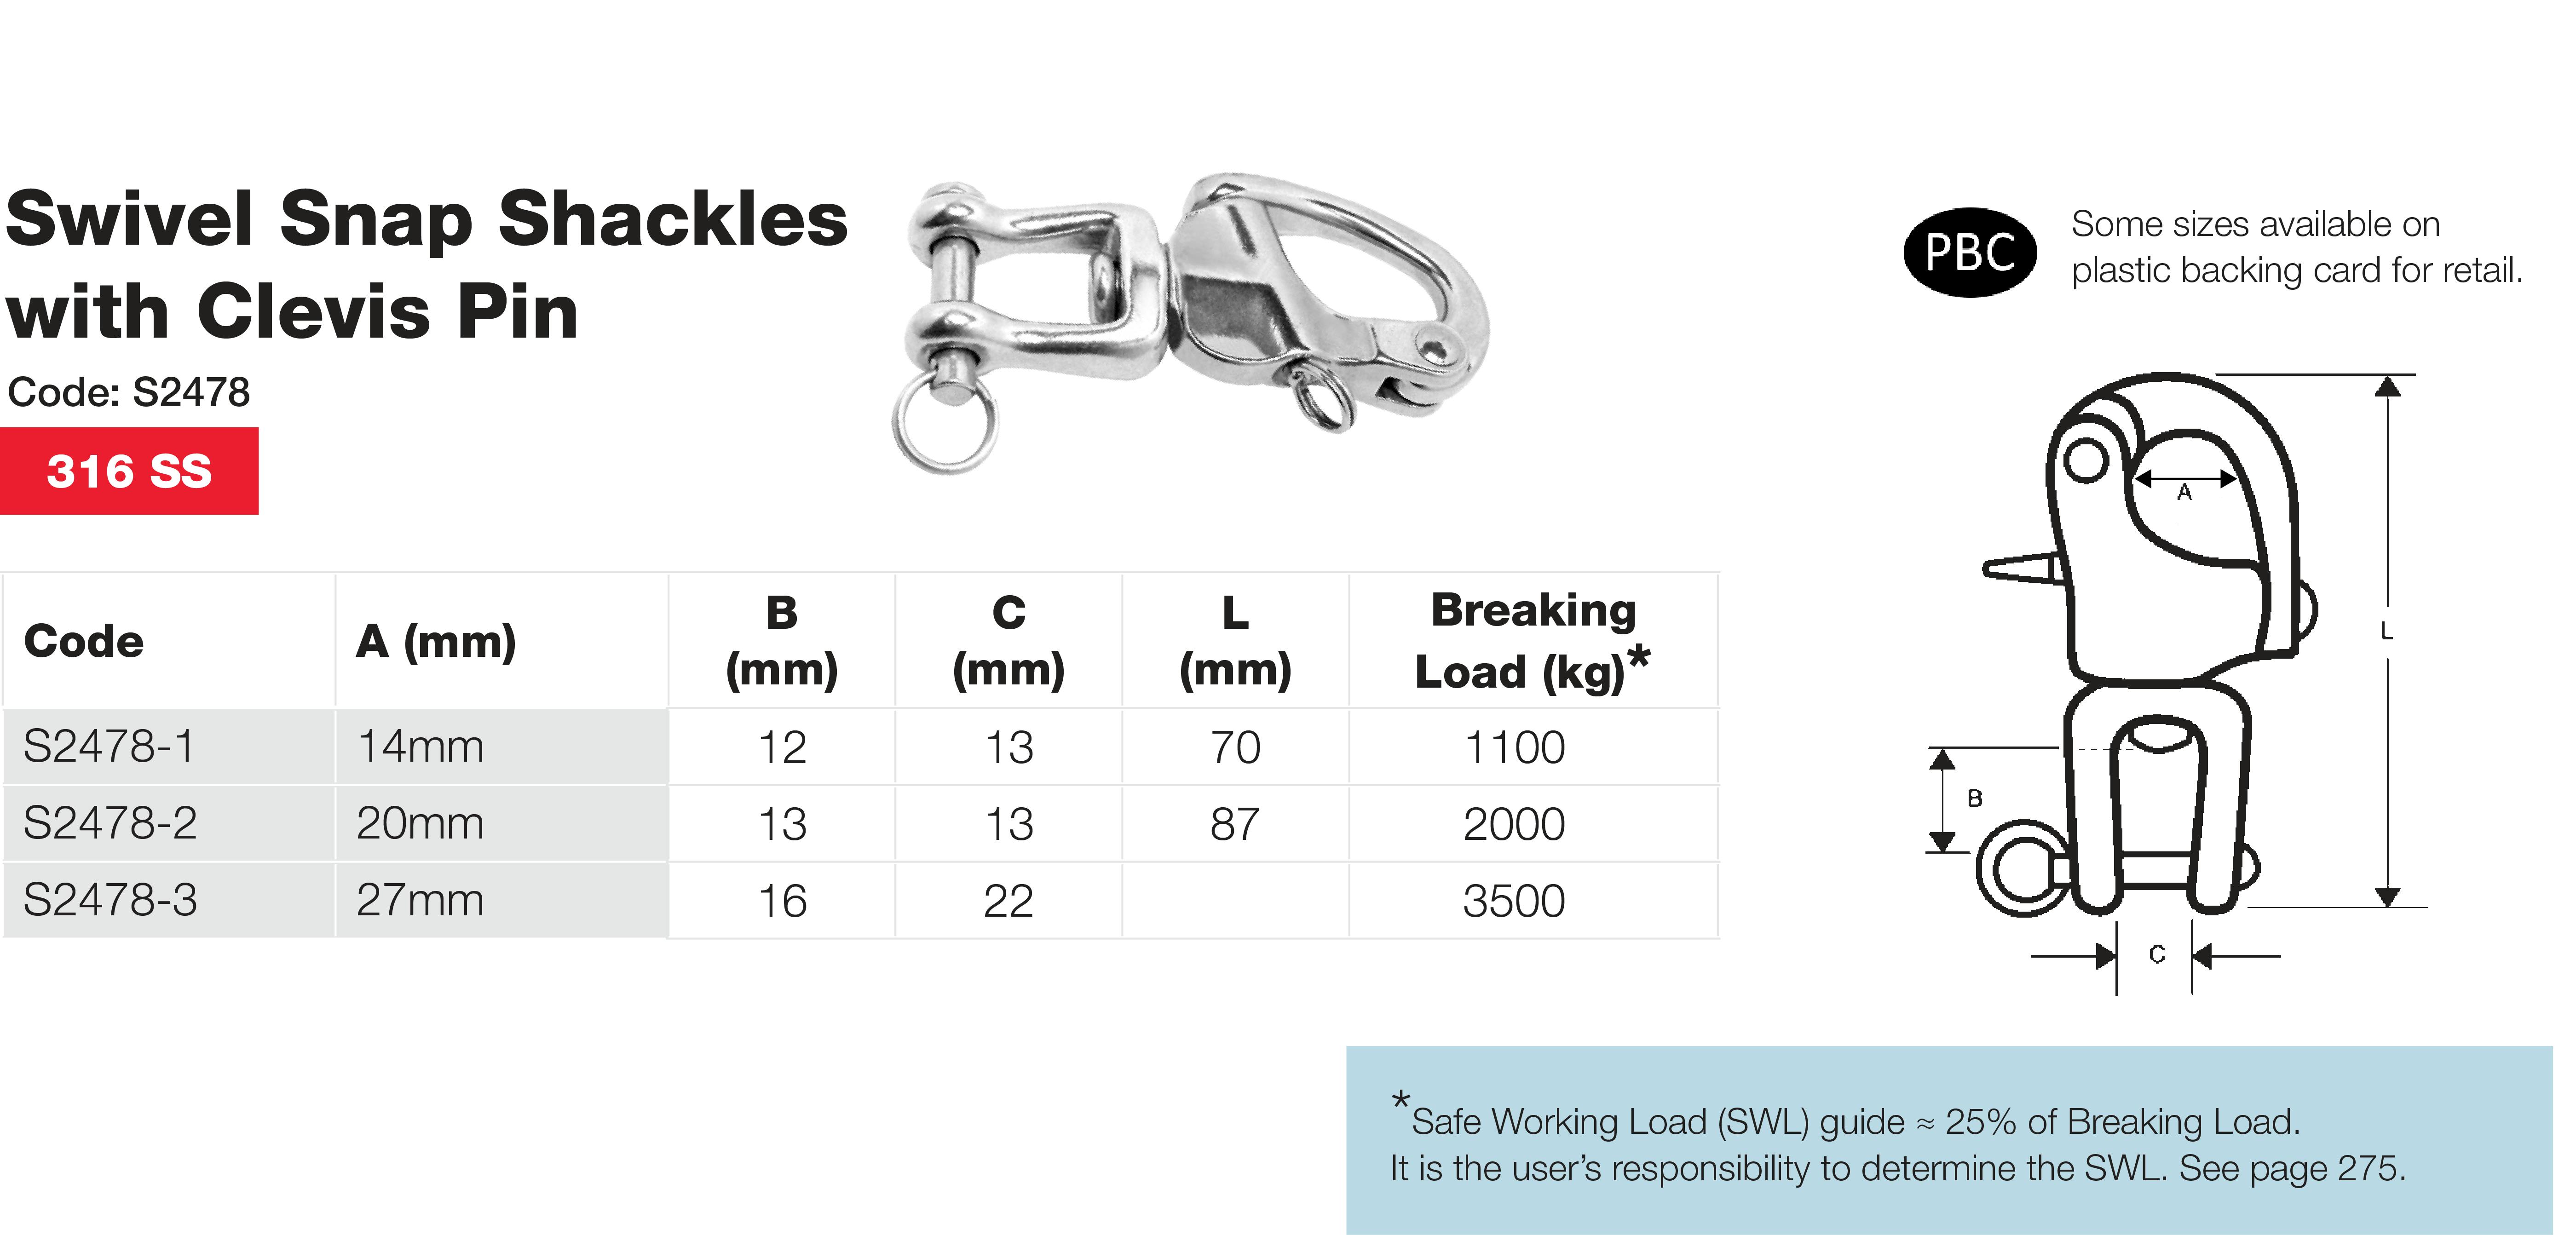 Stainless Marine Swivel Snap Shackle with Clevis Performance Data